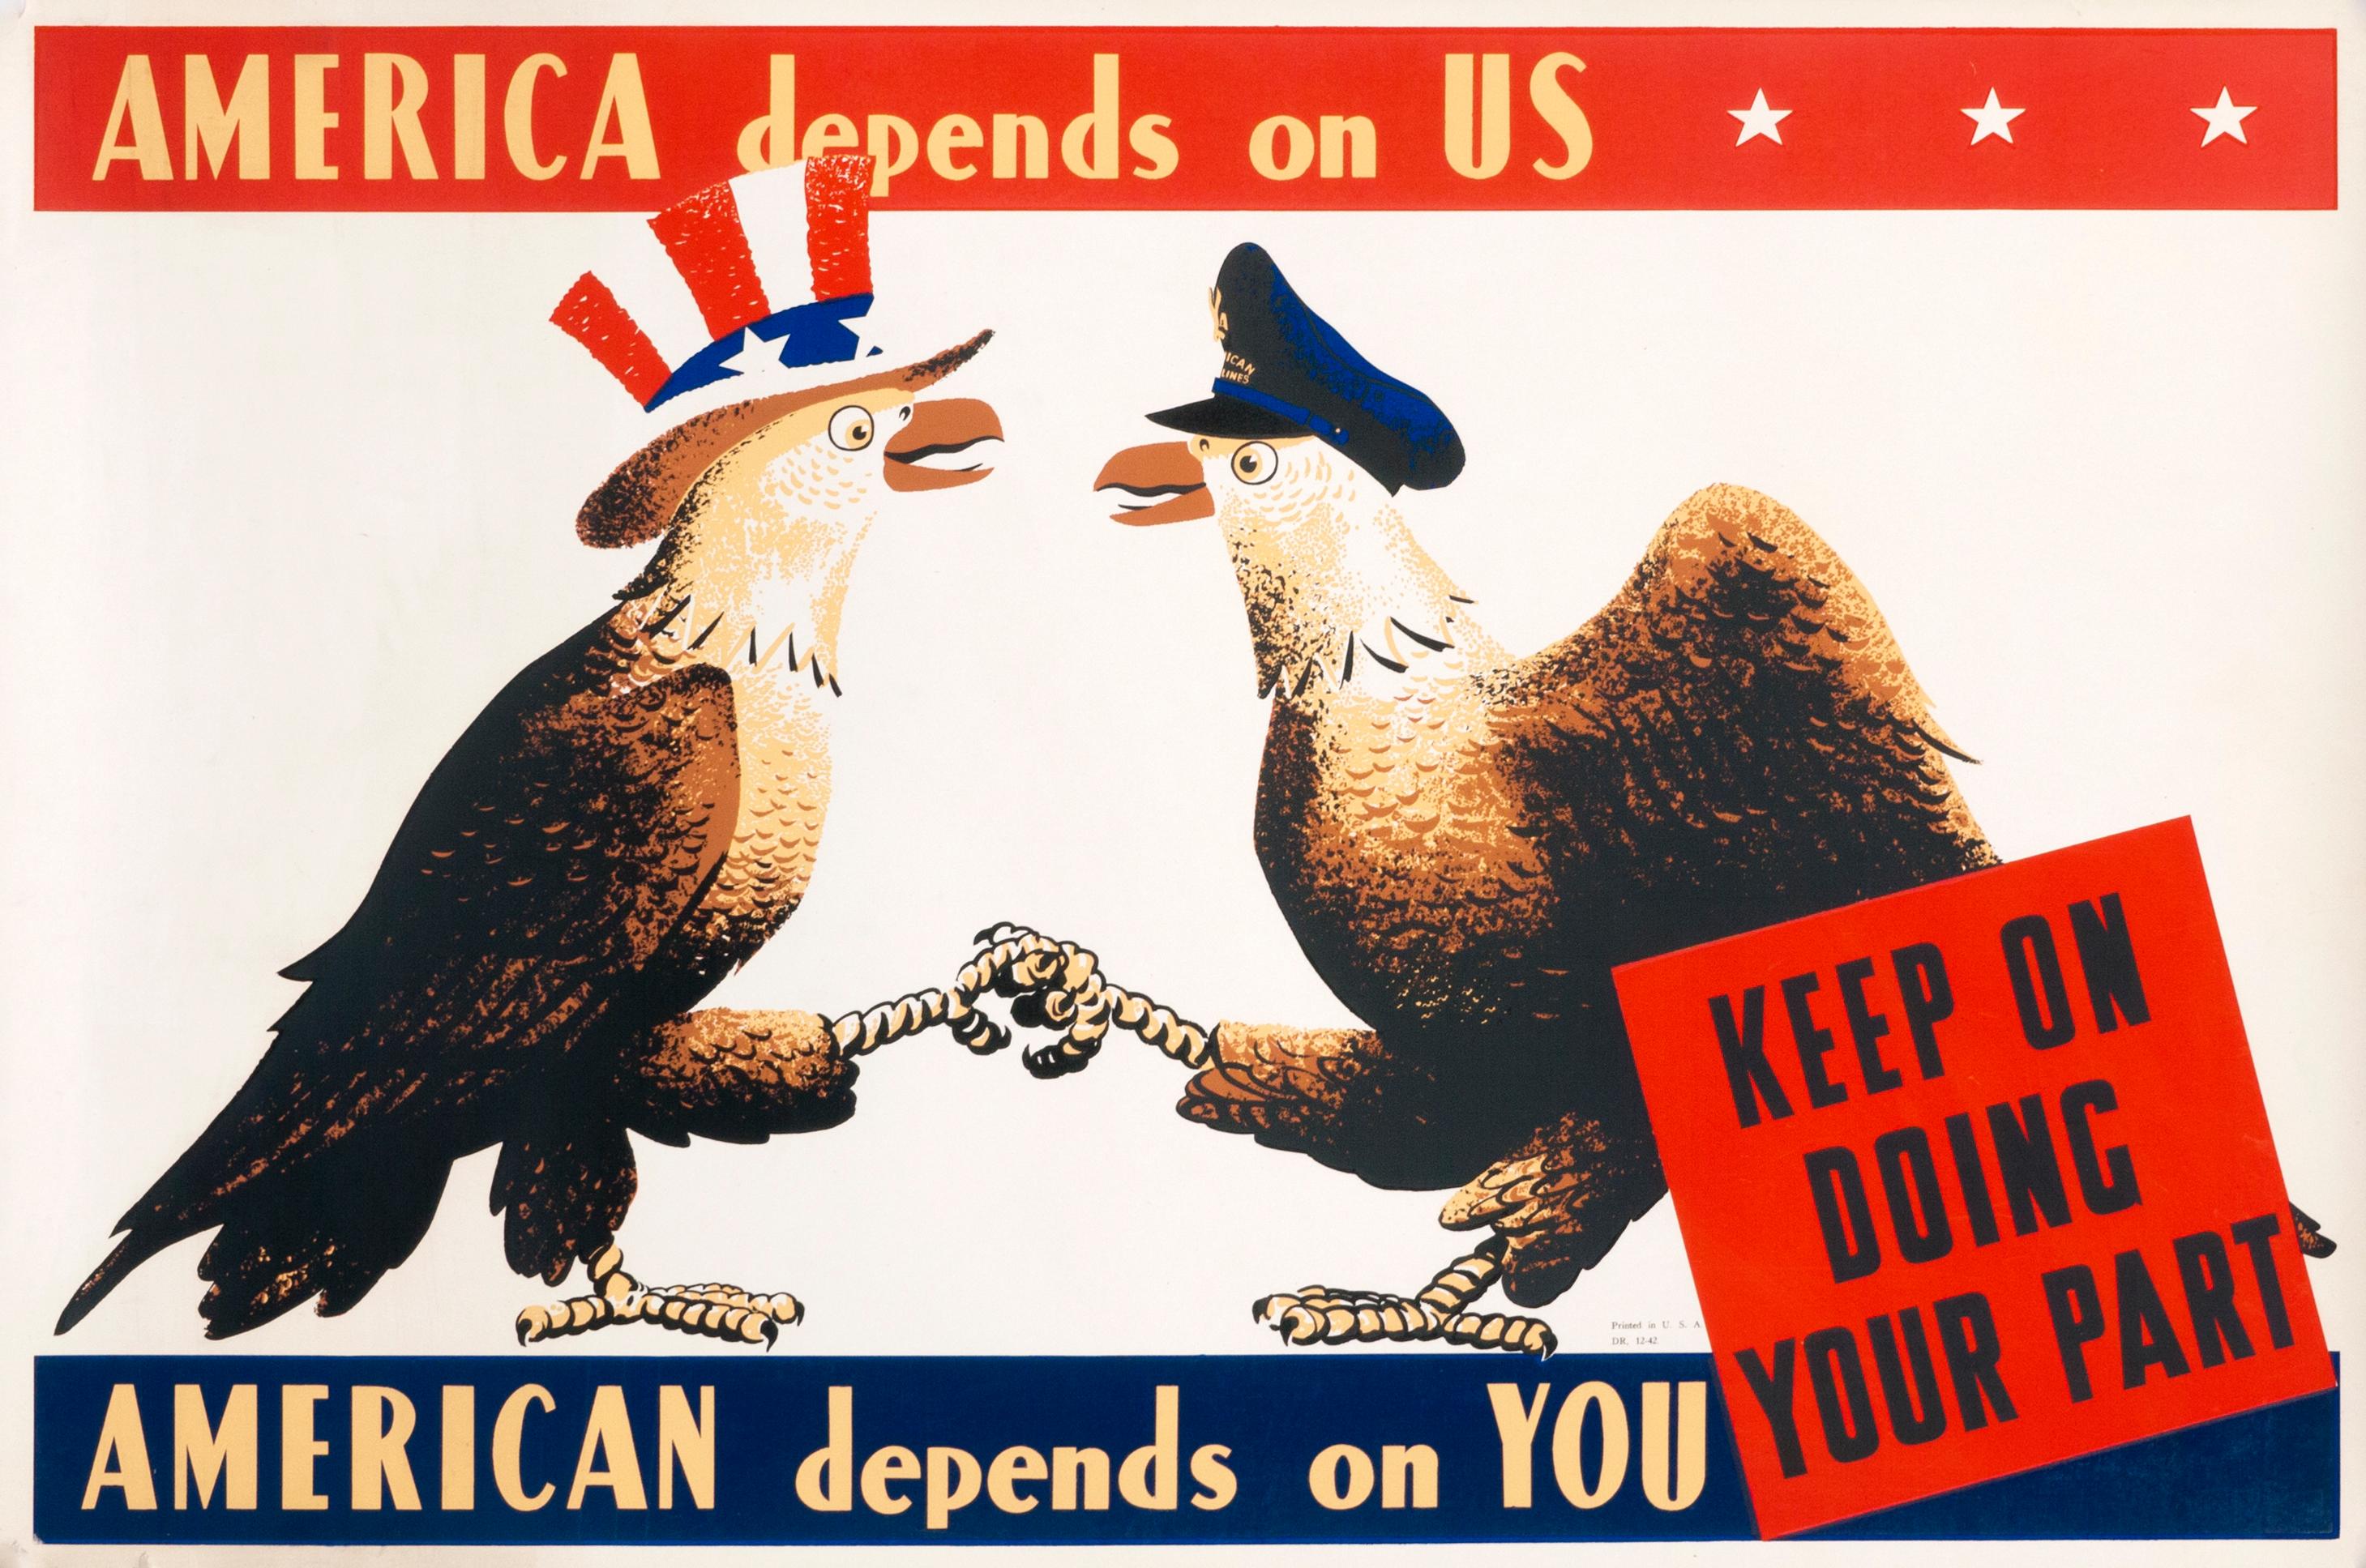 "America Depends on Us - American Depends on You" Original WWII Airline Poster - Print by Unknown